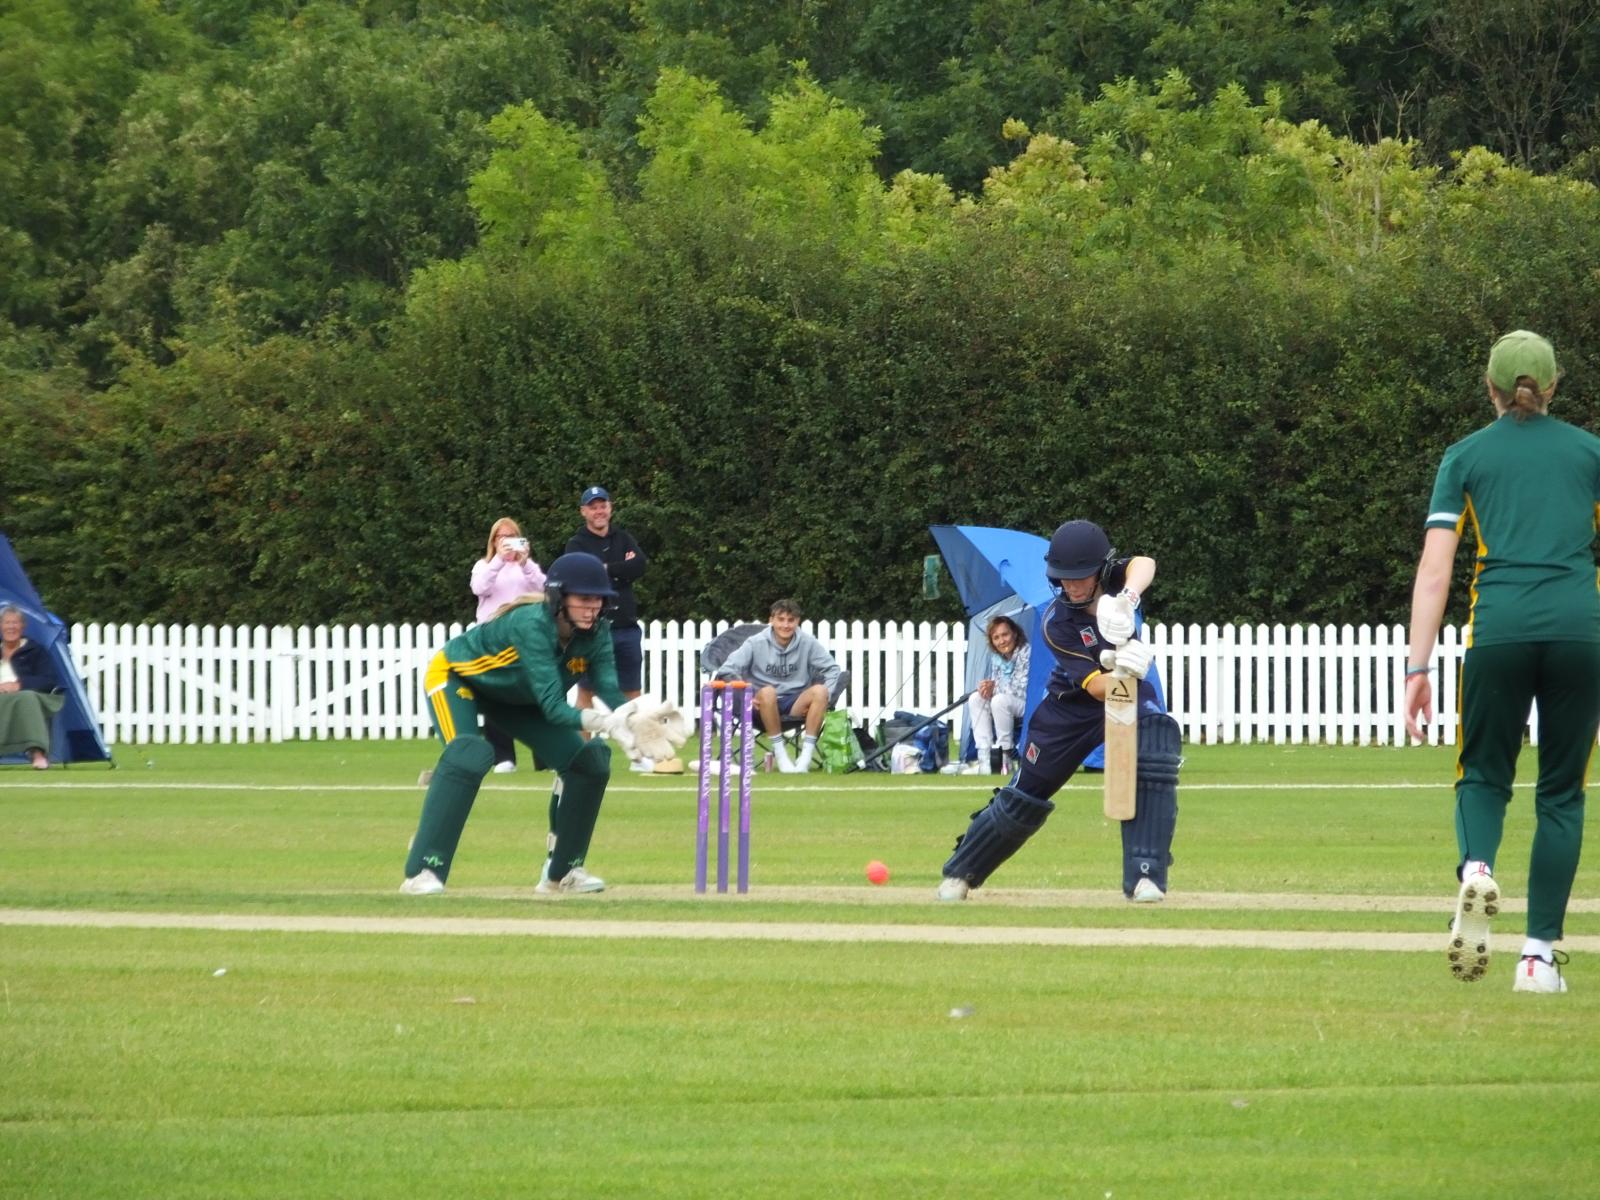 Corney on her way to 73 not out against Nottinghamshire.